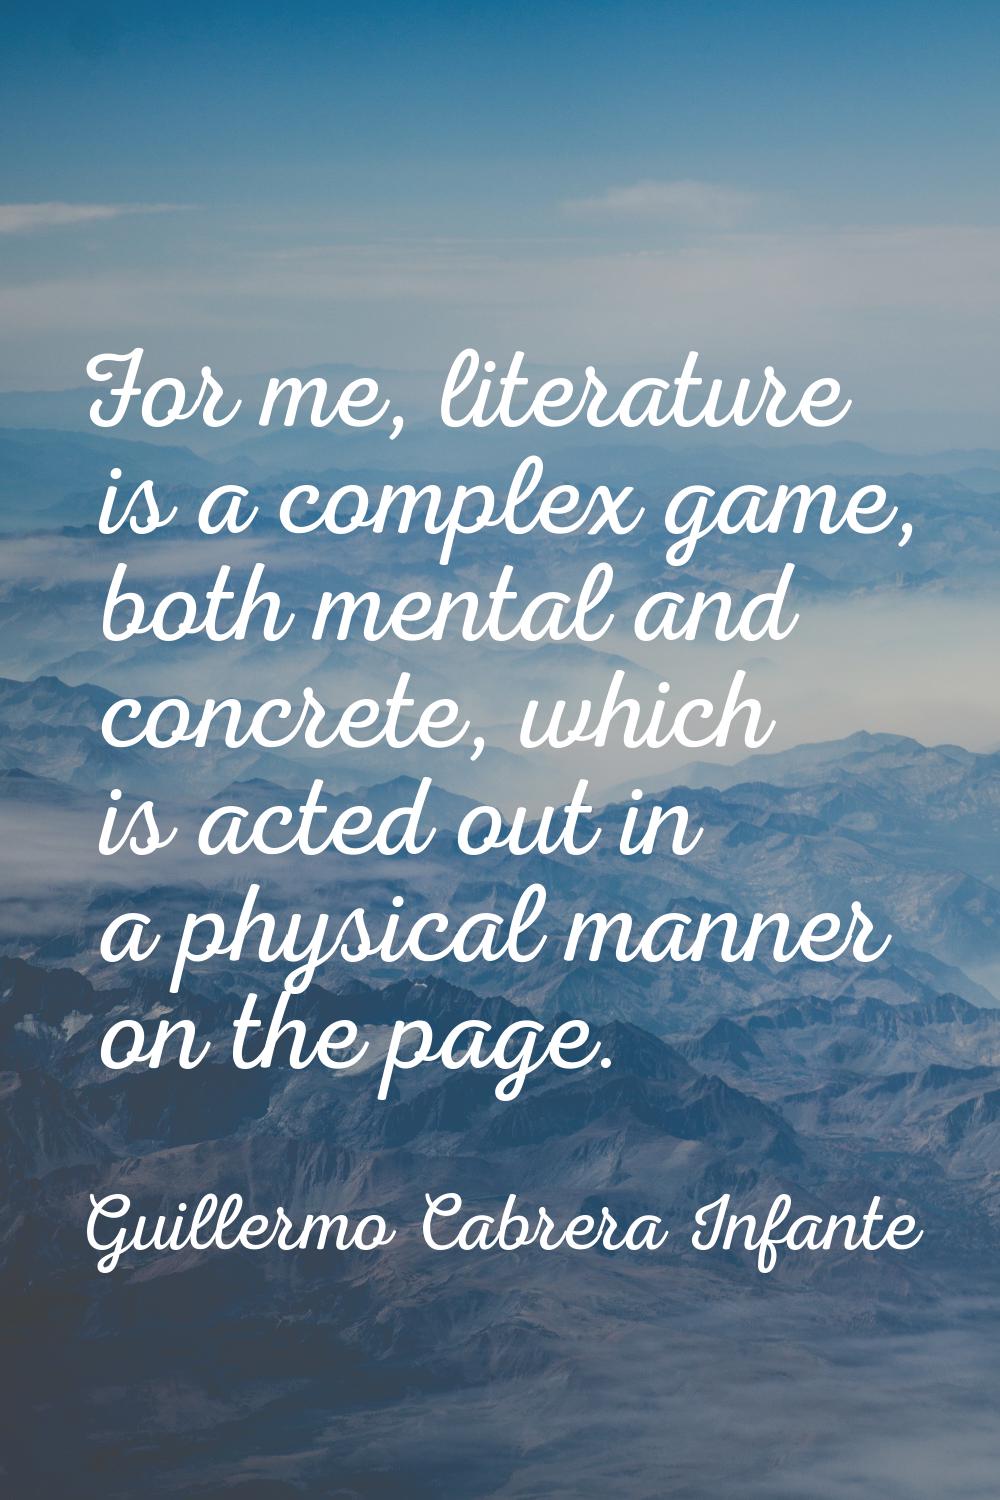 For me, literature is a complex game, both mental and concrete, which is acted out in a physical ma